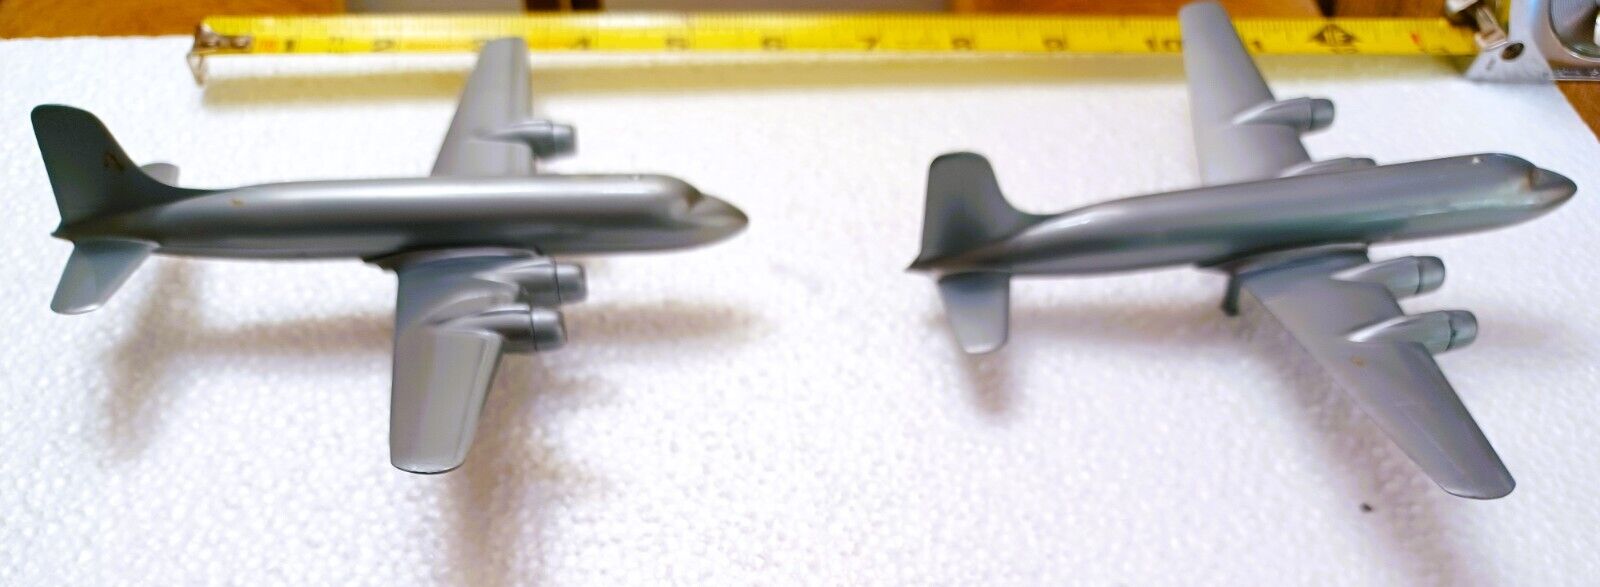 McDonnell Douglas  2 DC-6 Model Aircraft with stand support needs props 7x51/2